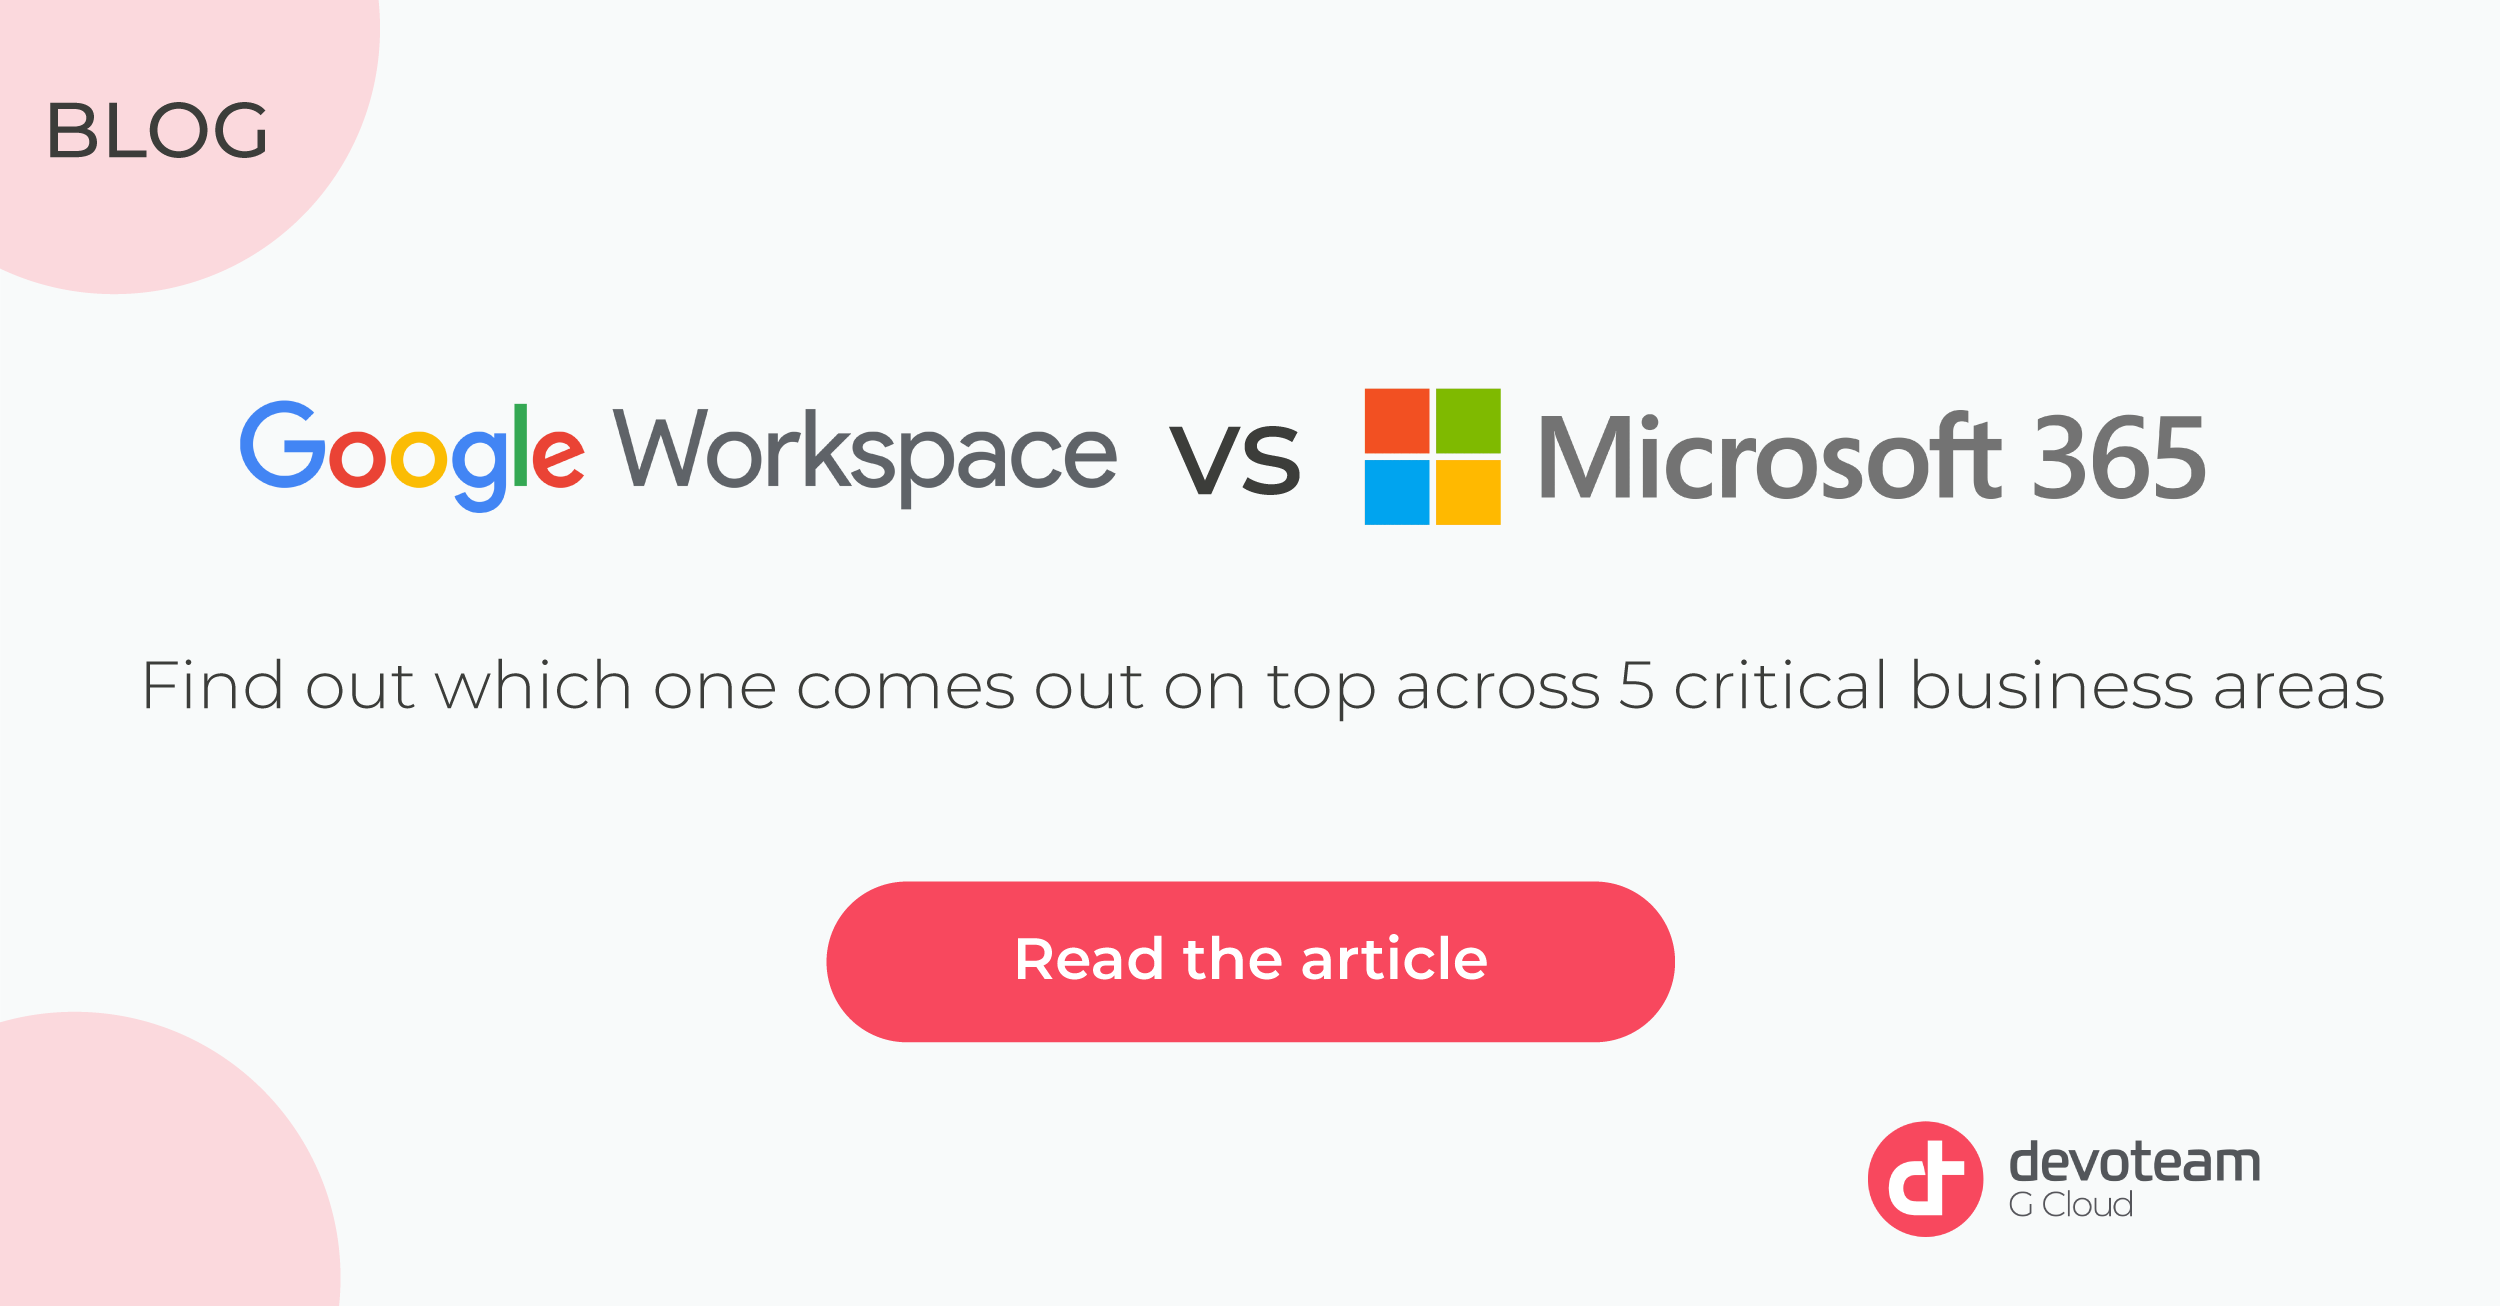 Google Workspace vs Microsoft 365 which one comes out on top?